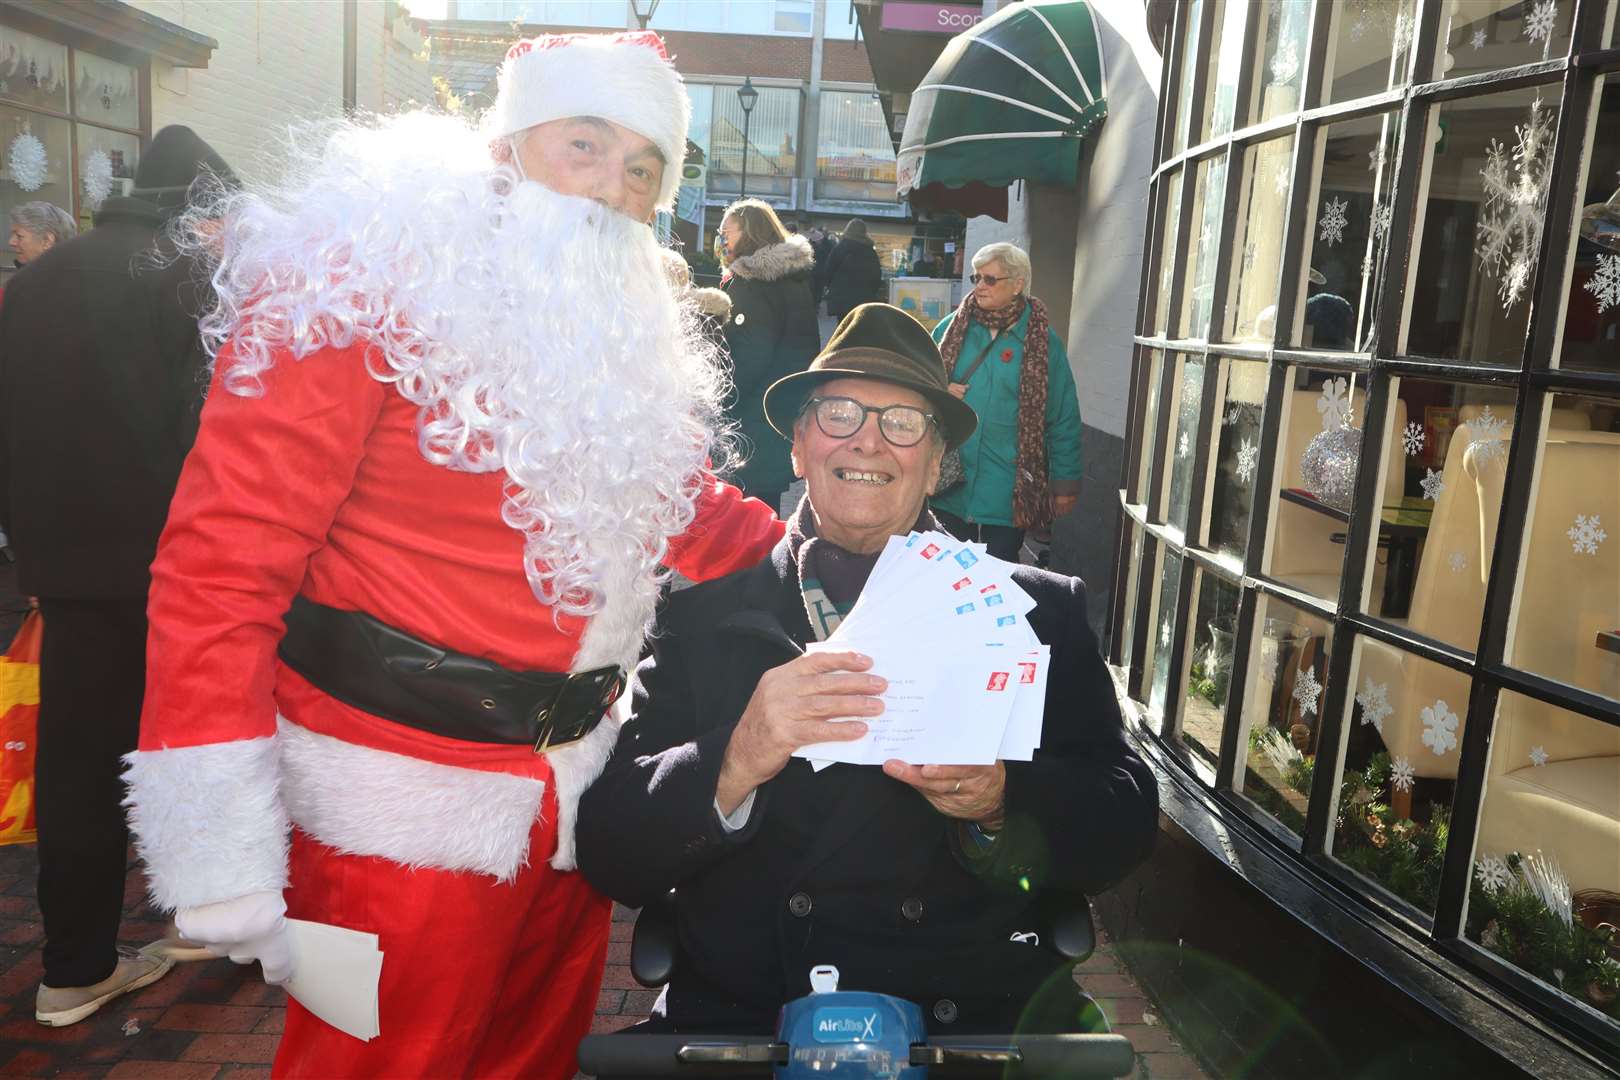 Sittingbourne's 'whistling postman' Dale Howting, pictured with some of cheques he will be posting, along with Santa Mike Day from the Methodist church